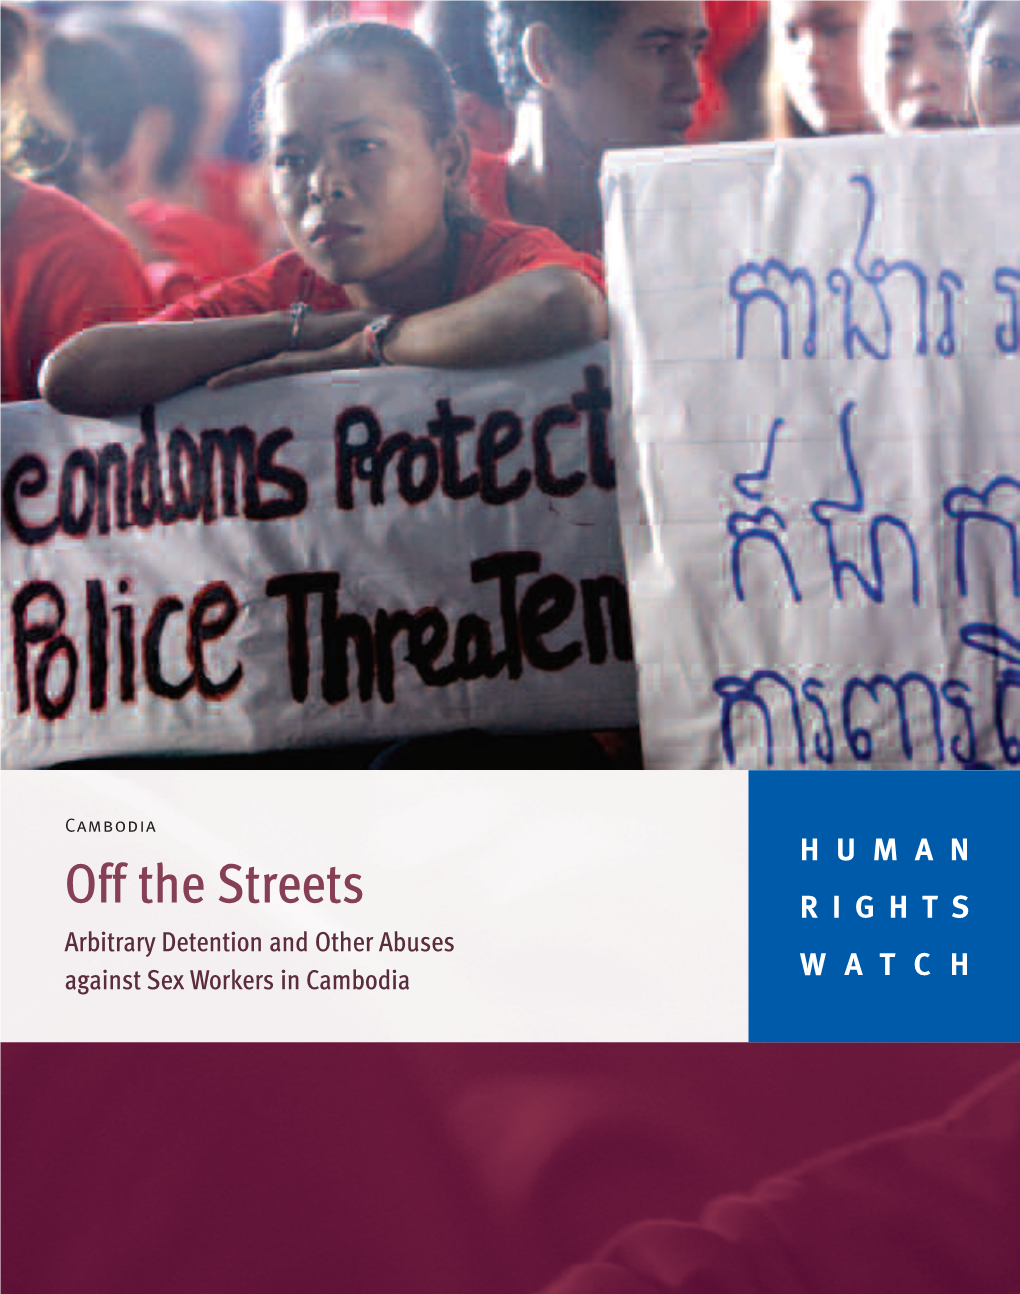 Off the Streets RIGHTS Arbitrary Detention and Other Abuses Against Sex Workers in Cambodia WATCH